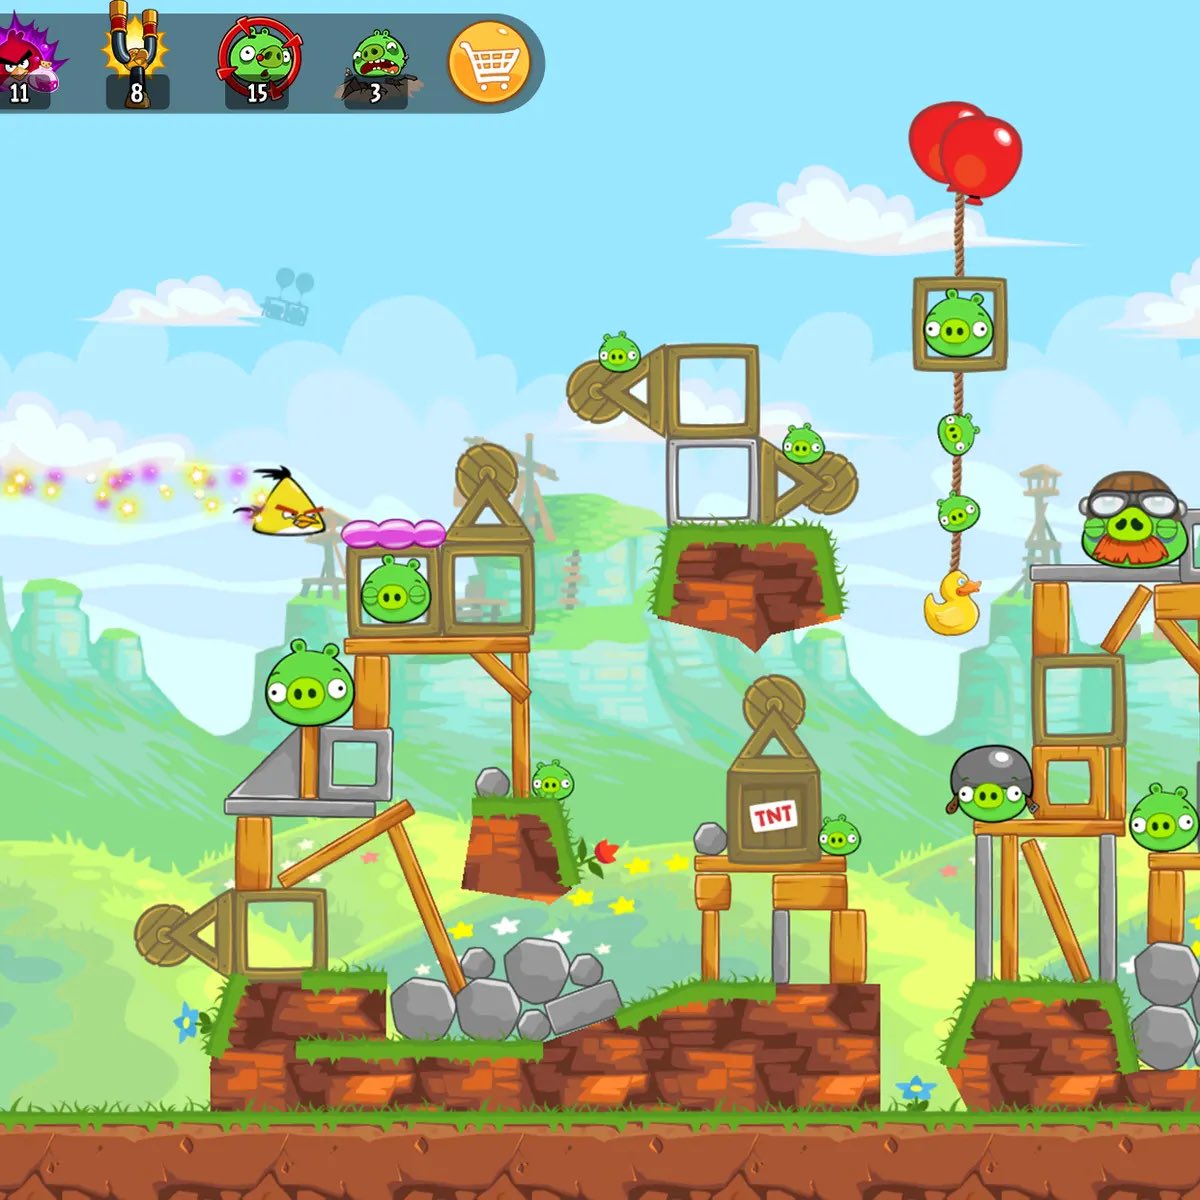 Angry Birds was inspired off a 2009 flash game known as Crush the Castle, and comparing the final game to it you can see where they took inspiration from.